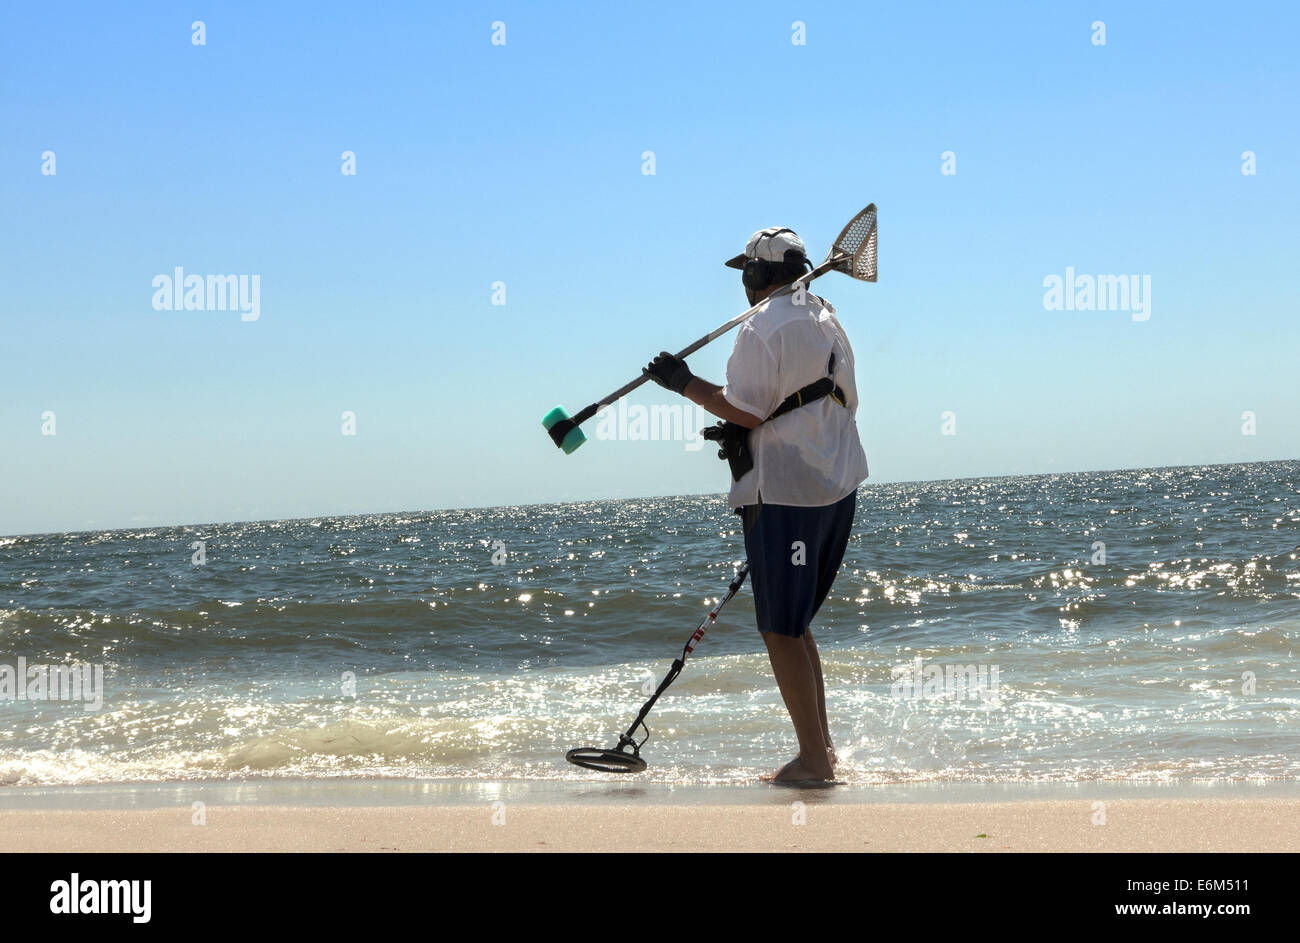 man at beach shoreline with metal detector Stock Photo